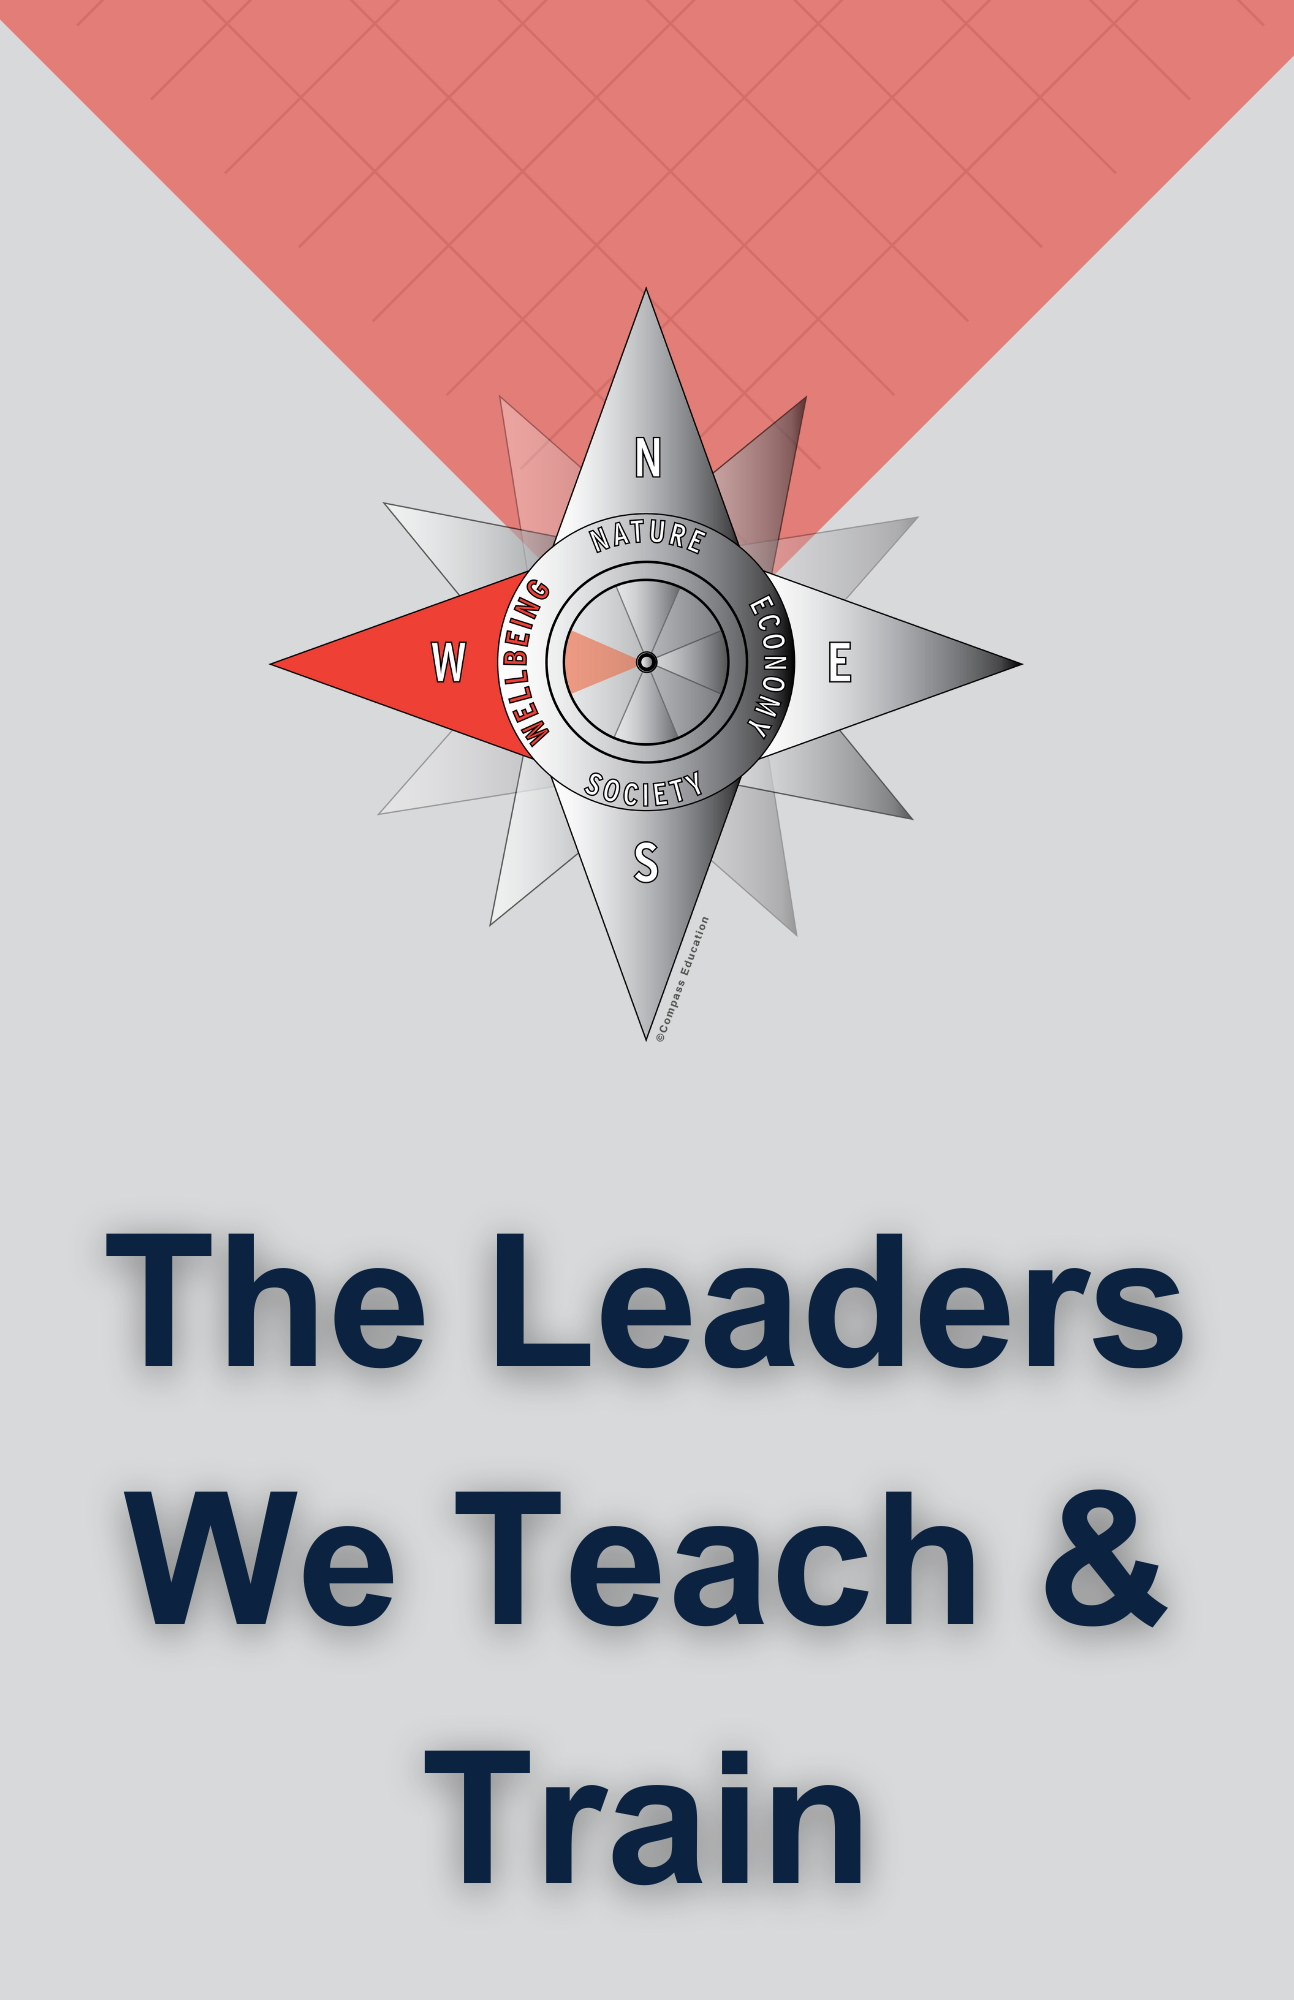 Sustainability compass with the "W" highlighted red to emphasize "wellbeing", text below that says "leaders we teach & train"